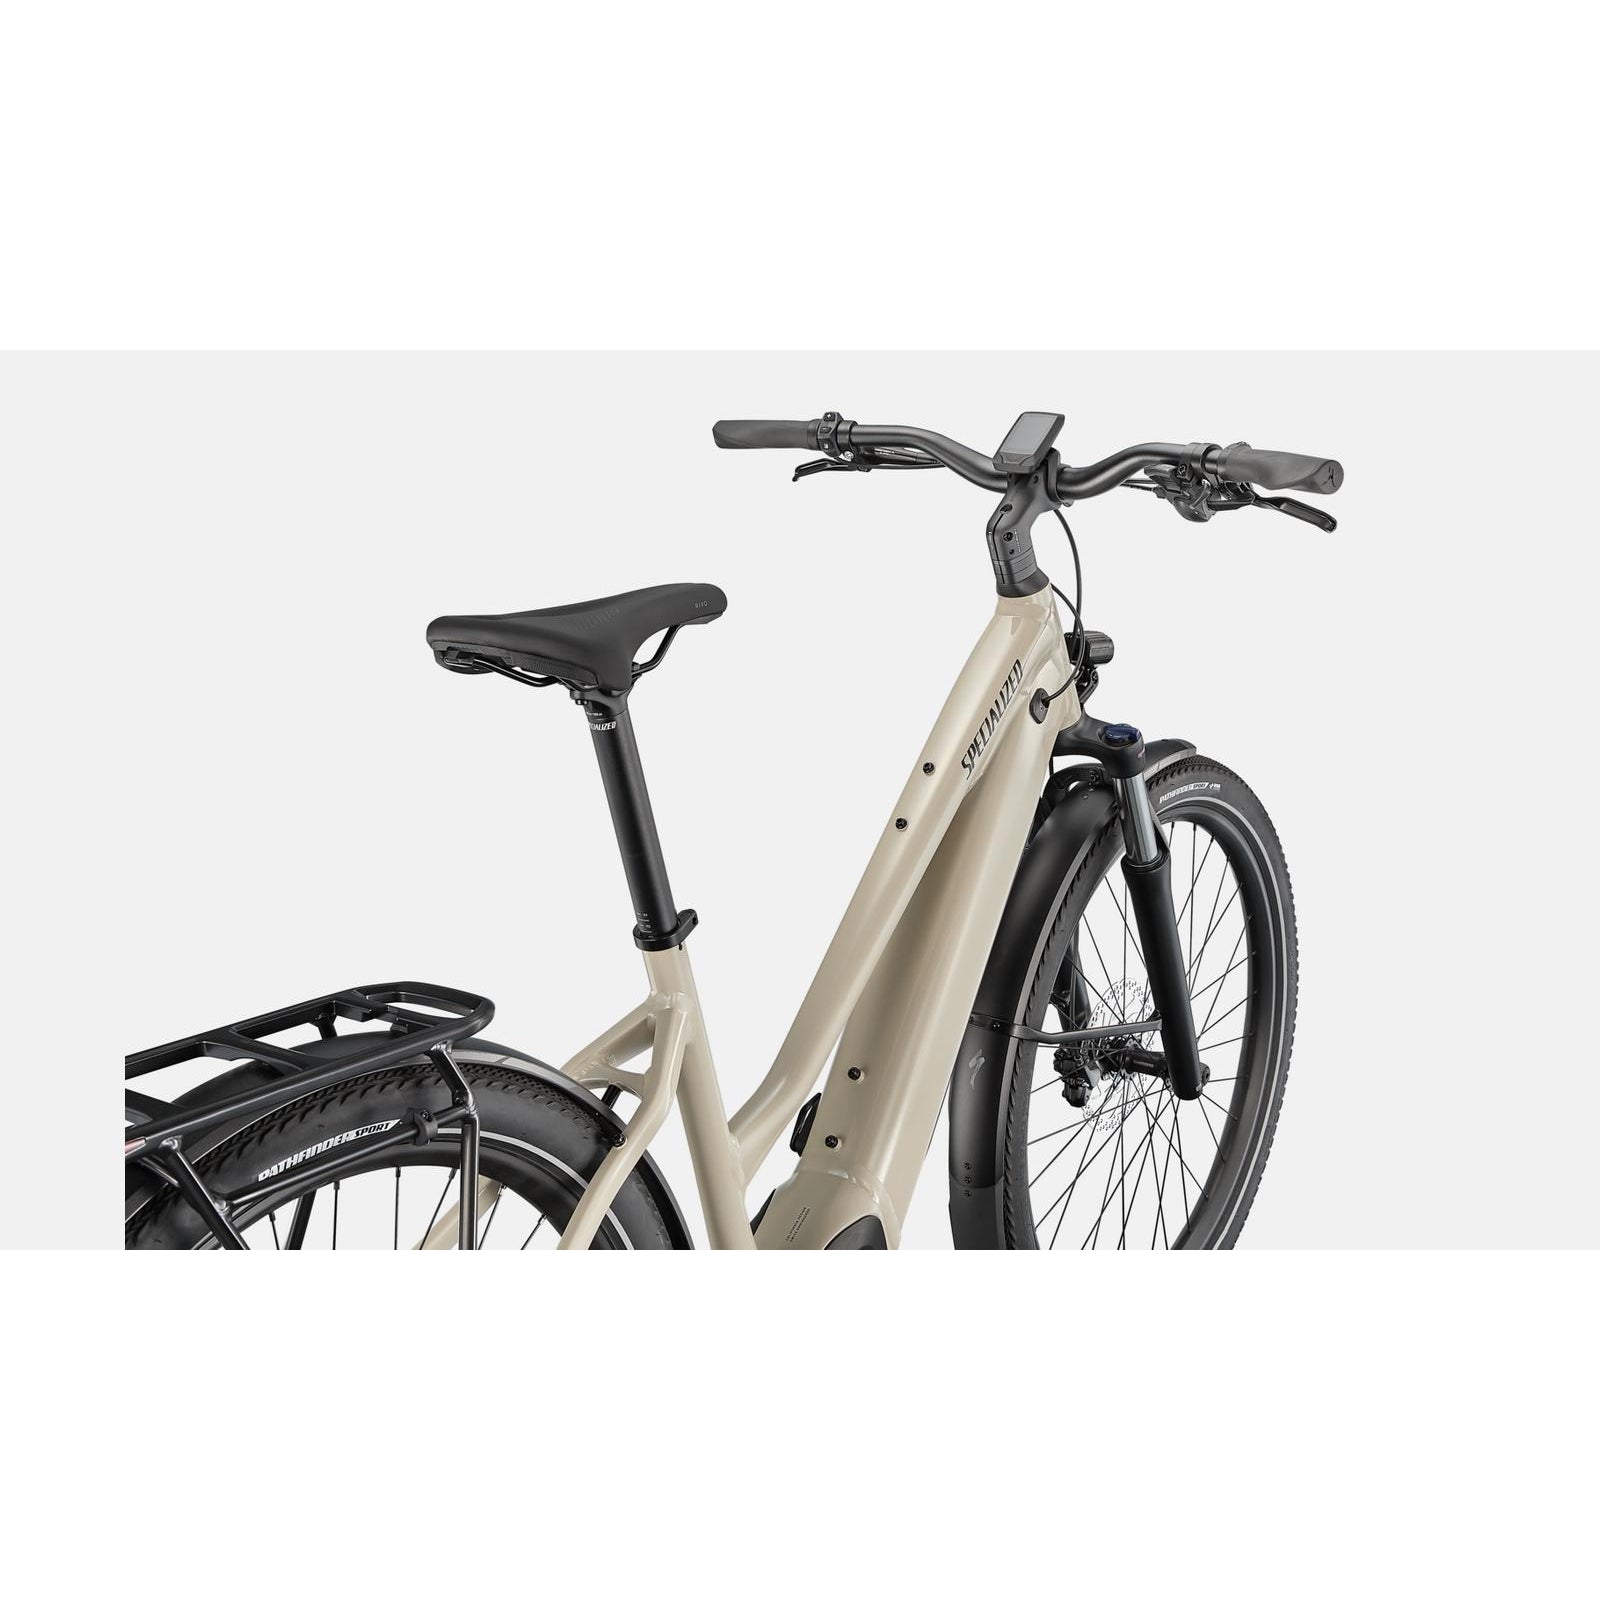 Specialized Turbo Vado 3.0 Step Through Active Electric Bike - Bikes - Bicycle Warehouse